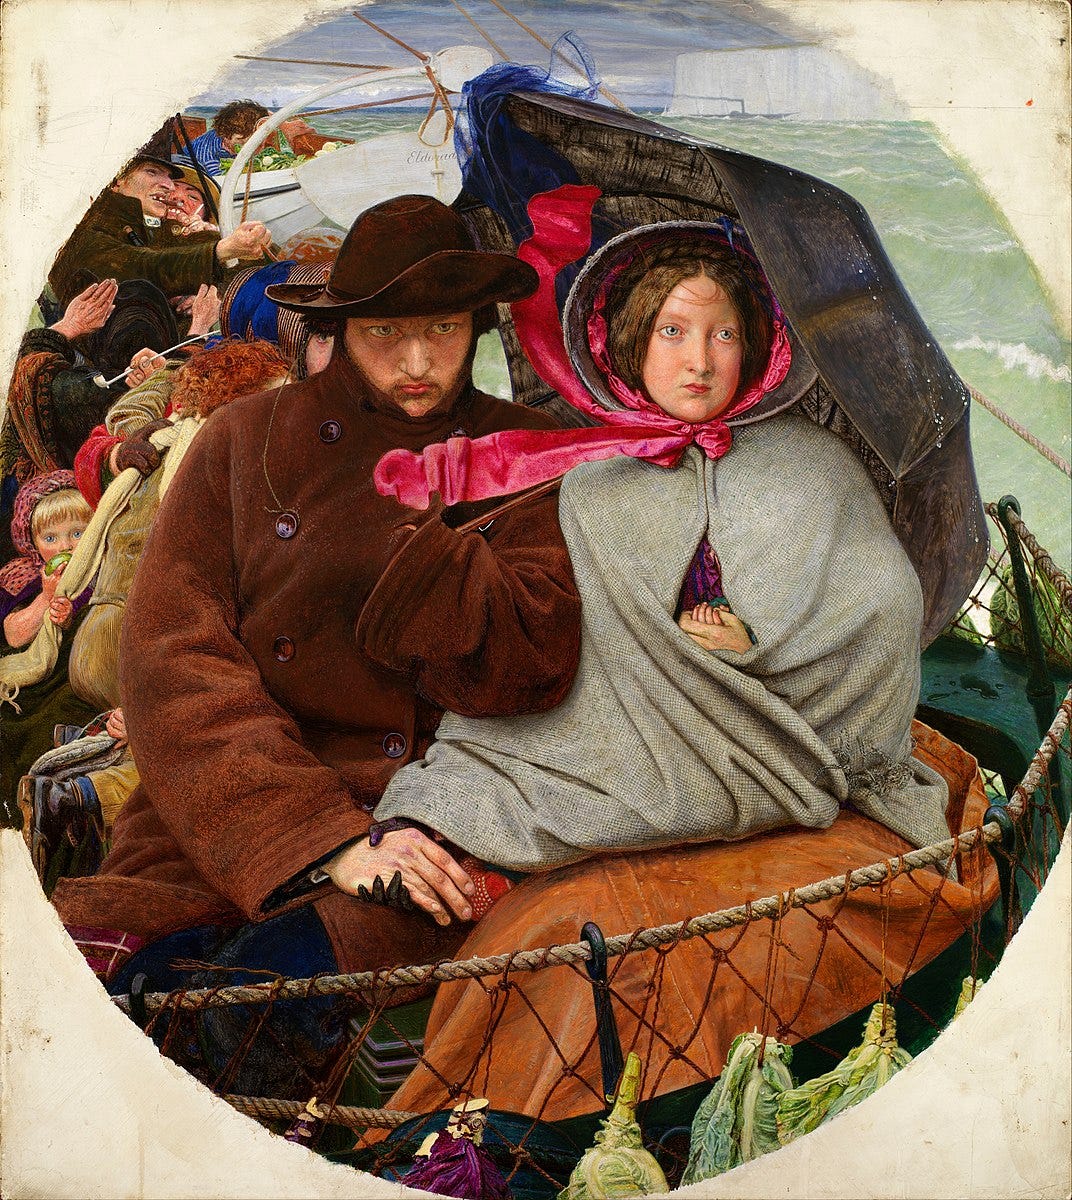 https://upload.wikimedia.org/wikipedia/commons/thumb/f/fb/Ford_Madox_Brown_-_The_Last_of_England_-_Google_Art_Project.jpg/1072px-Ford_Madox_Brown_-_The_Last_of_England_-_Google_Art_Project.jpg